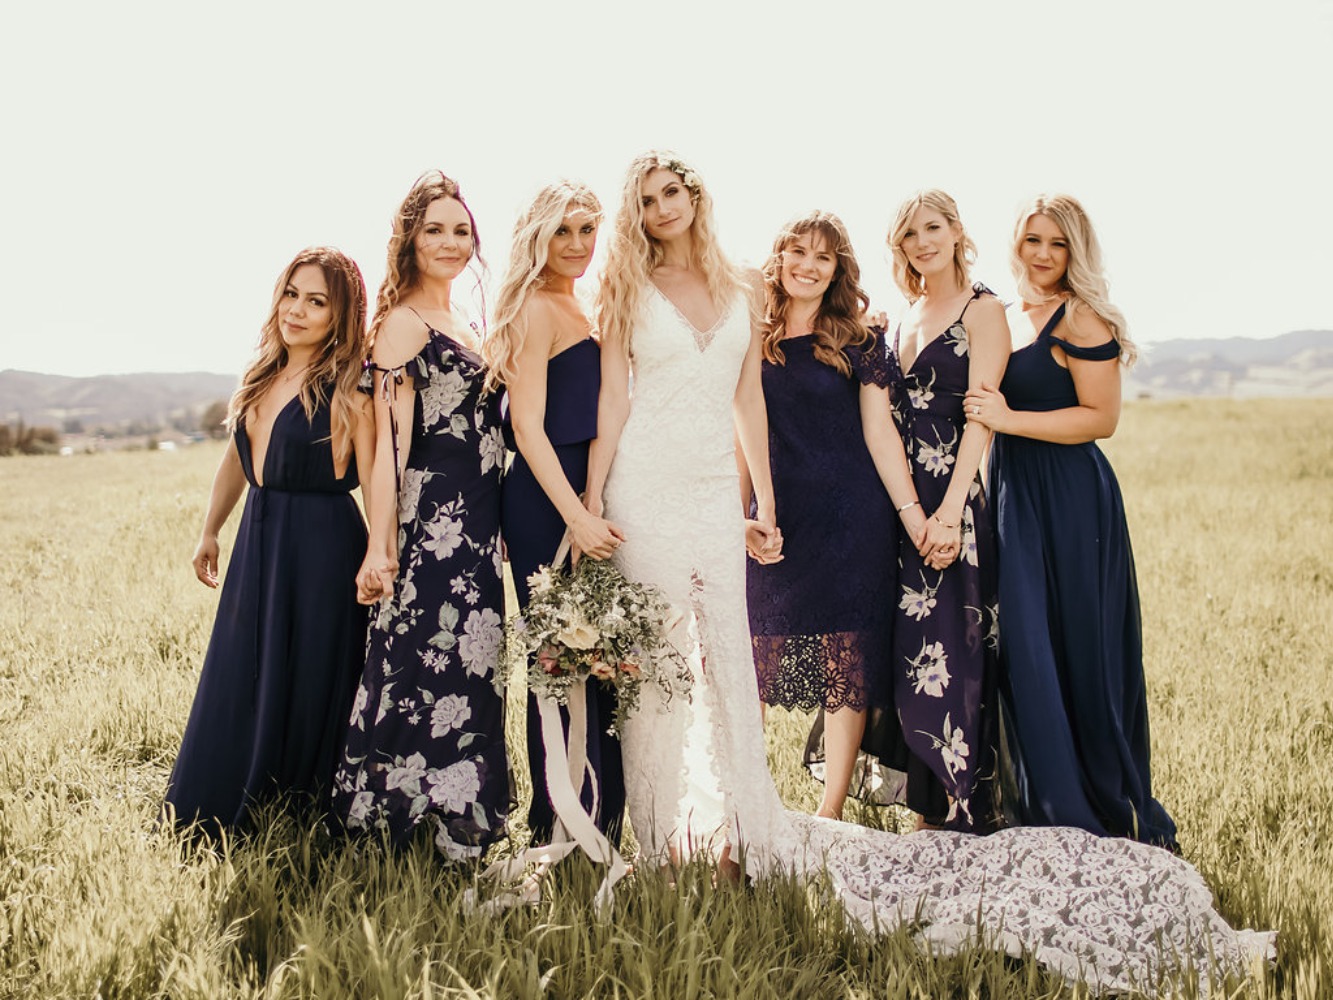 the bride and her bridesmaids in mismatched navy